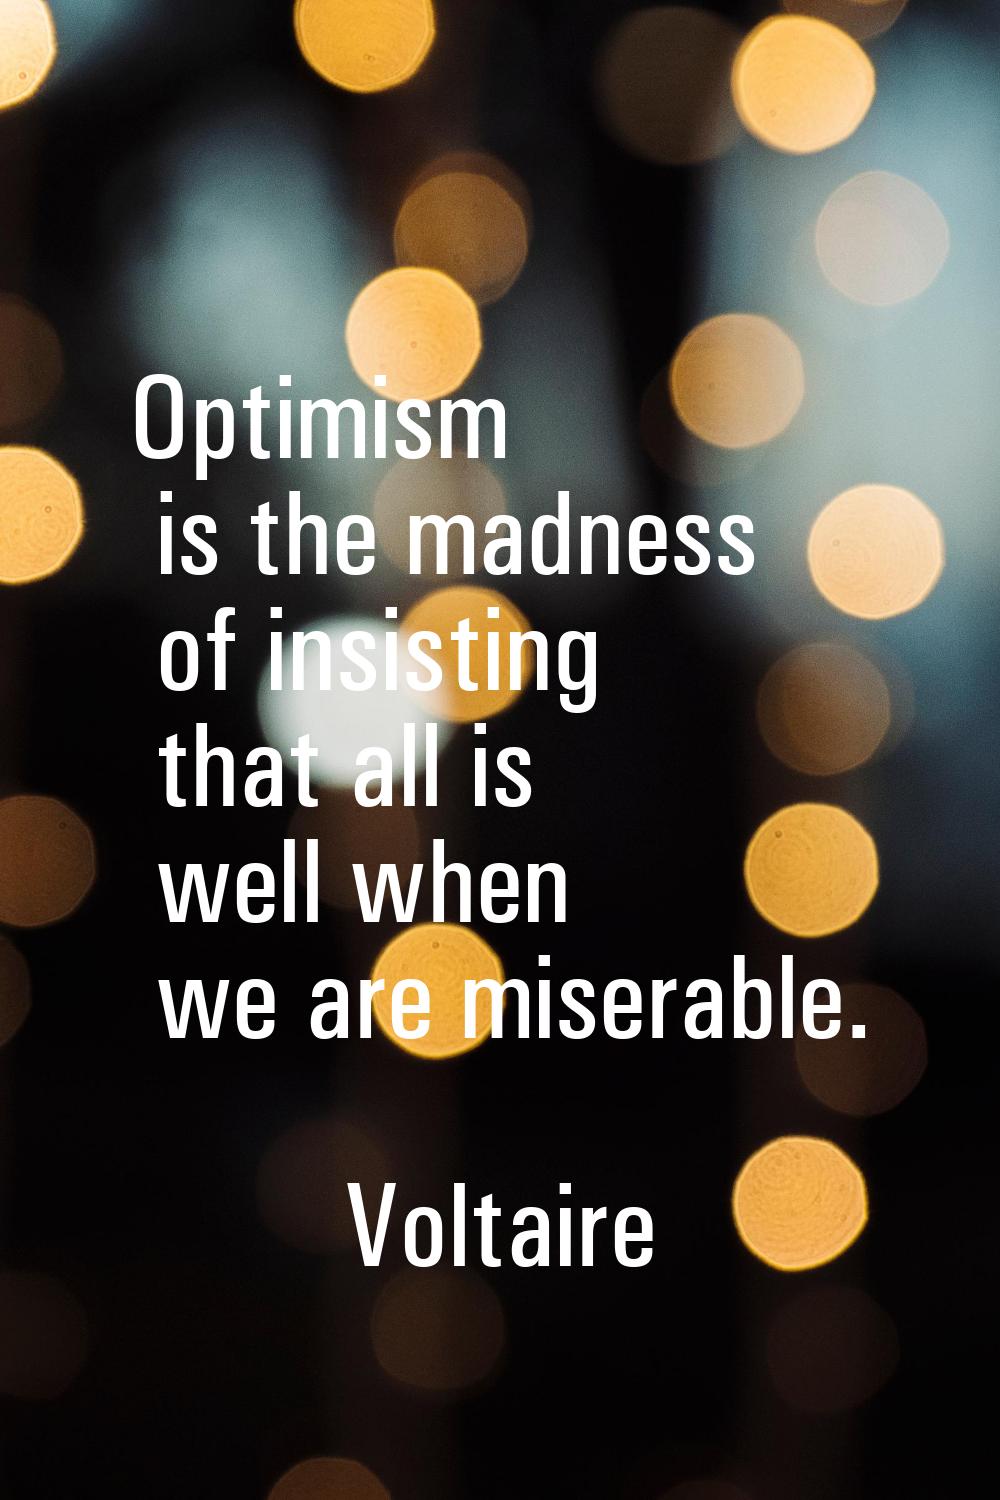 Optimism is the madness of insisting that all is well when we are miserable.